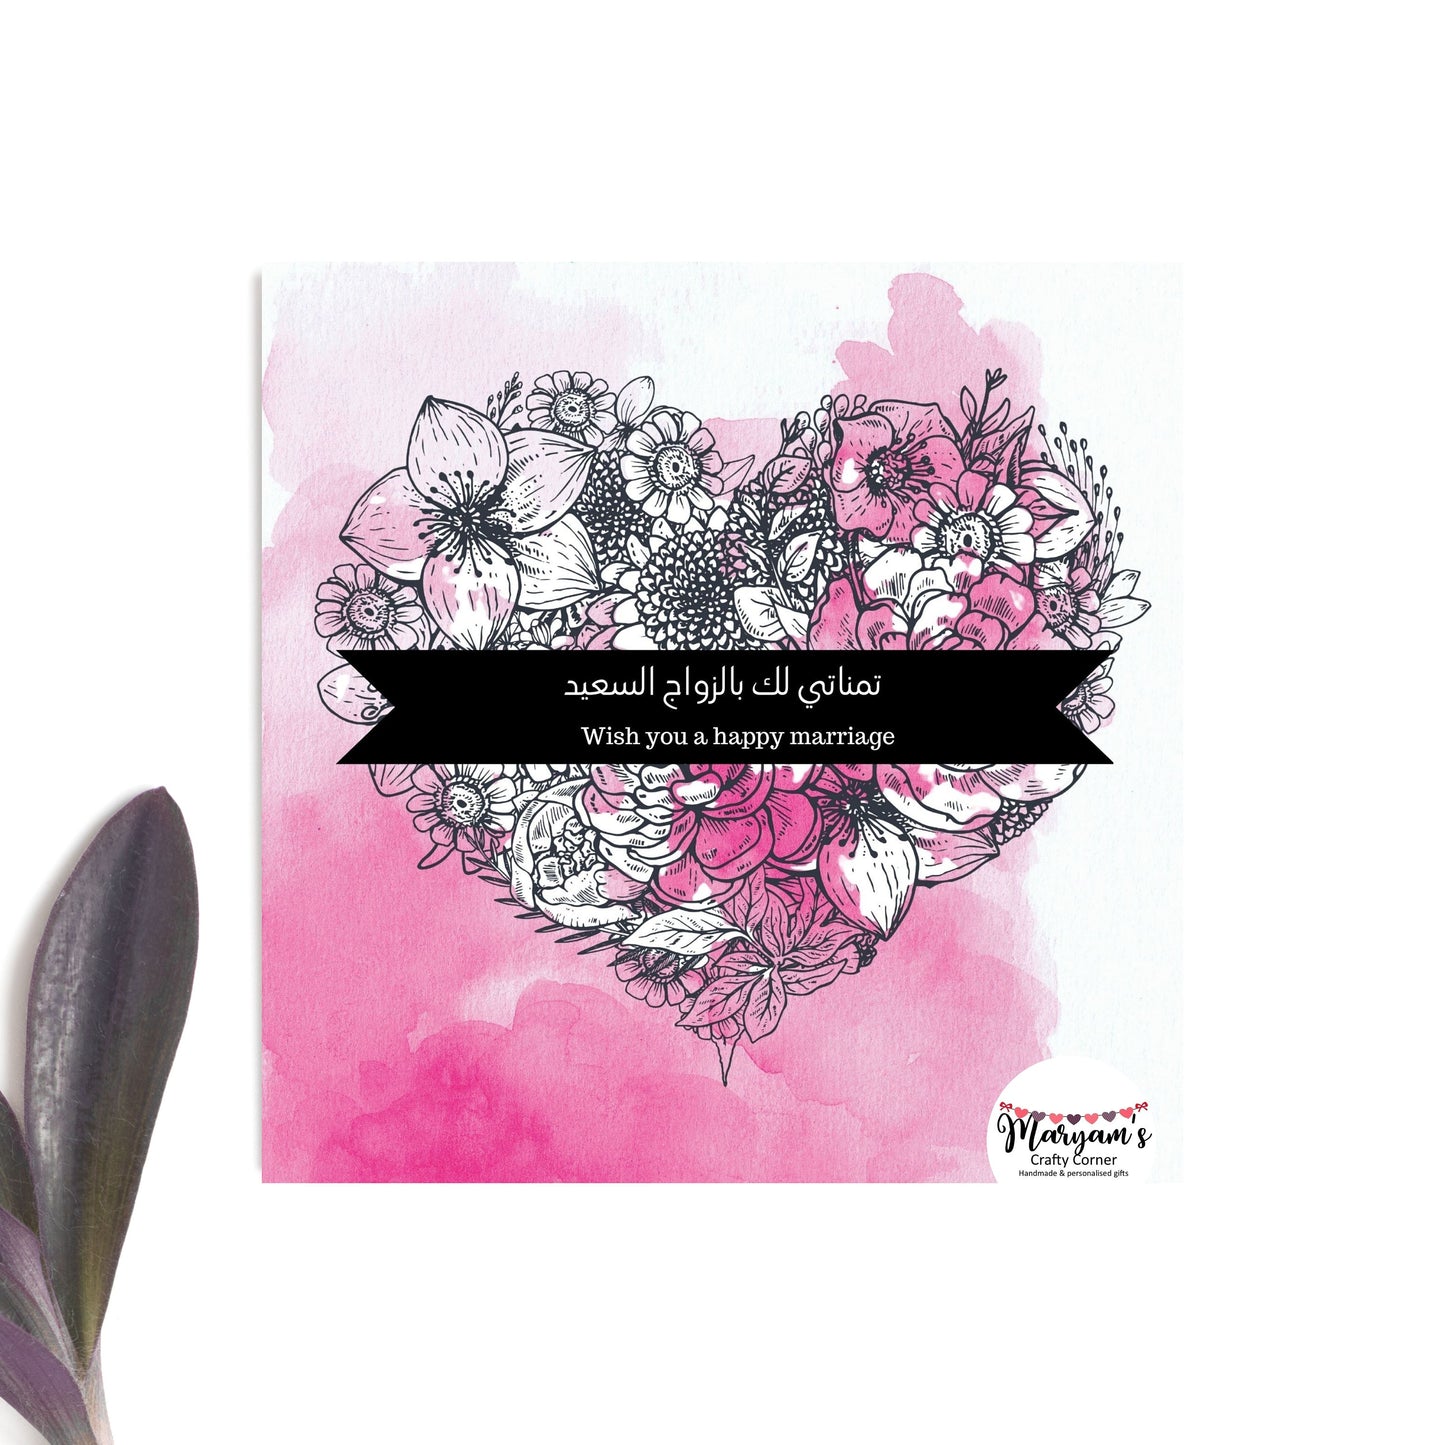 Arabic Wedding Greeting Card in english and Arbic appropriate for Nikah and weddings